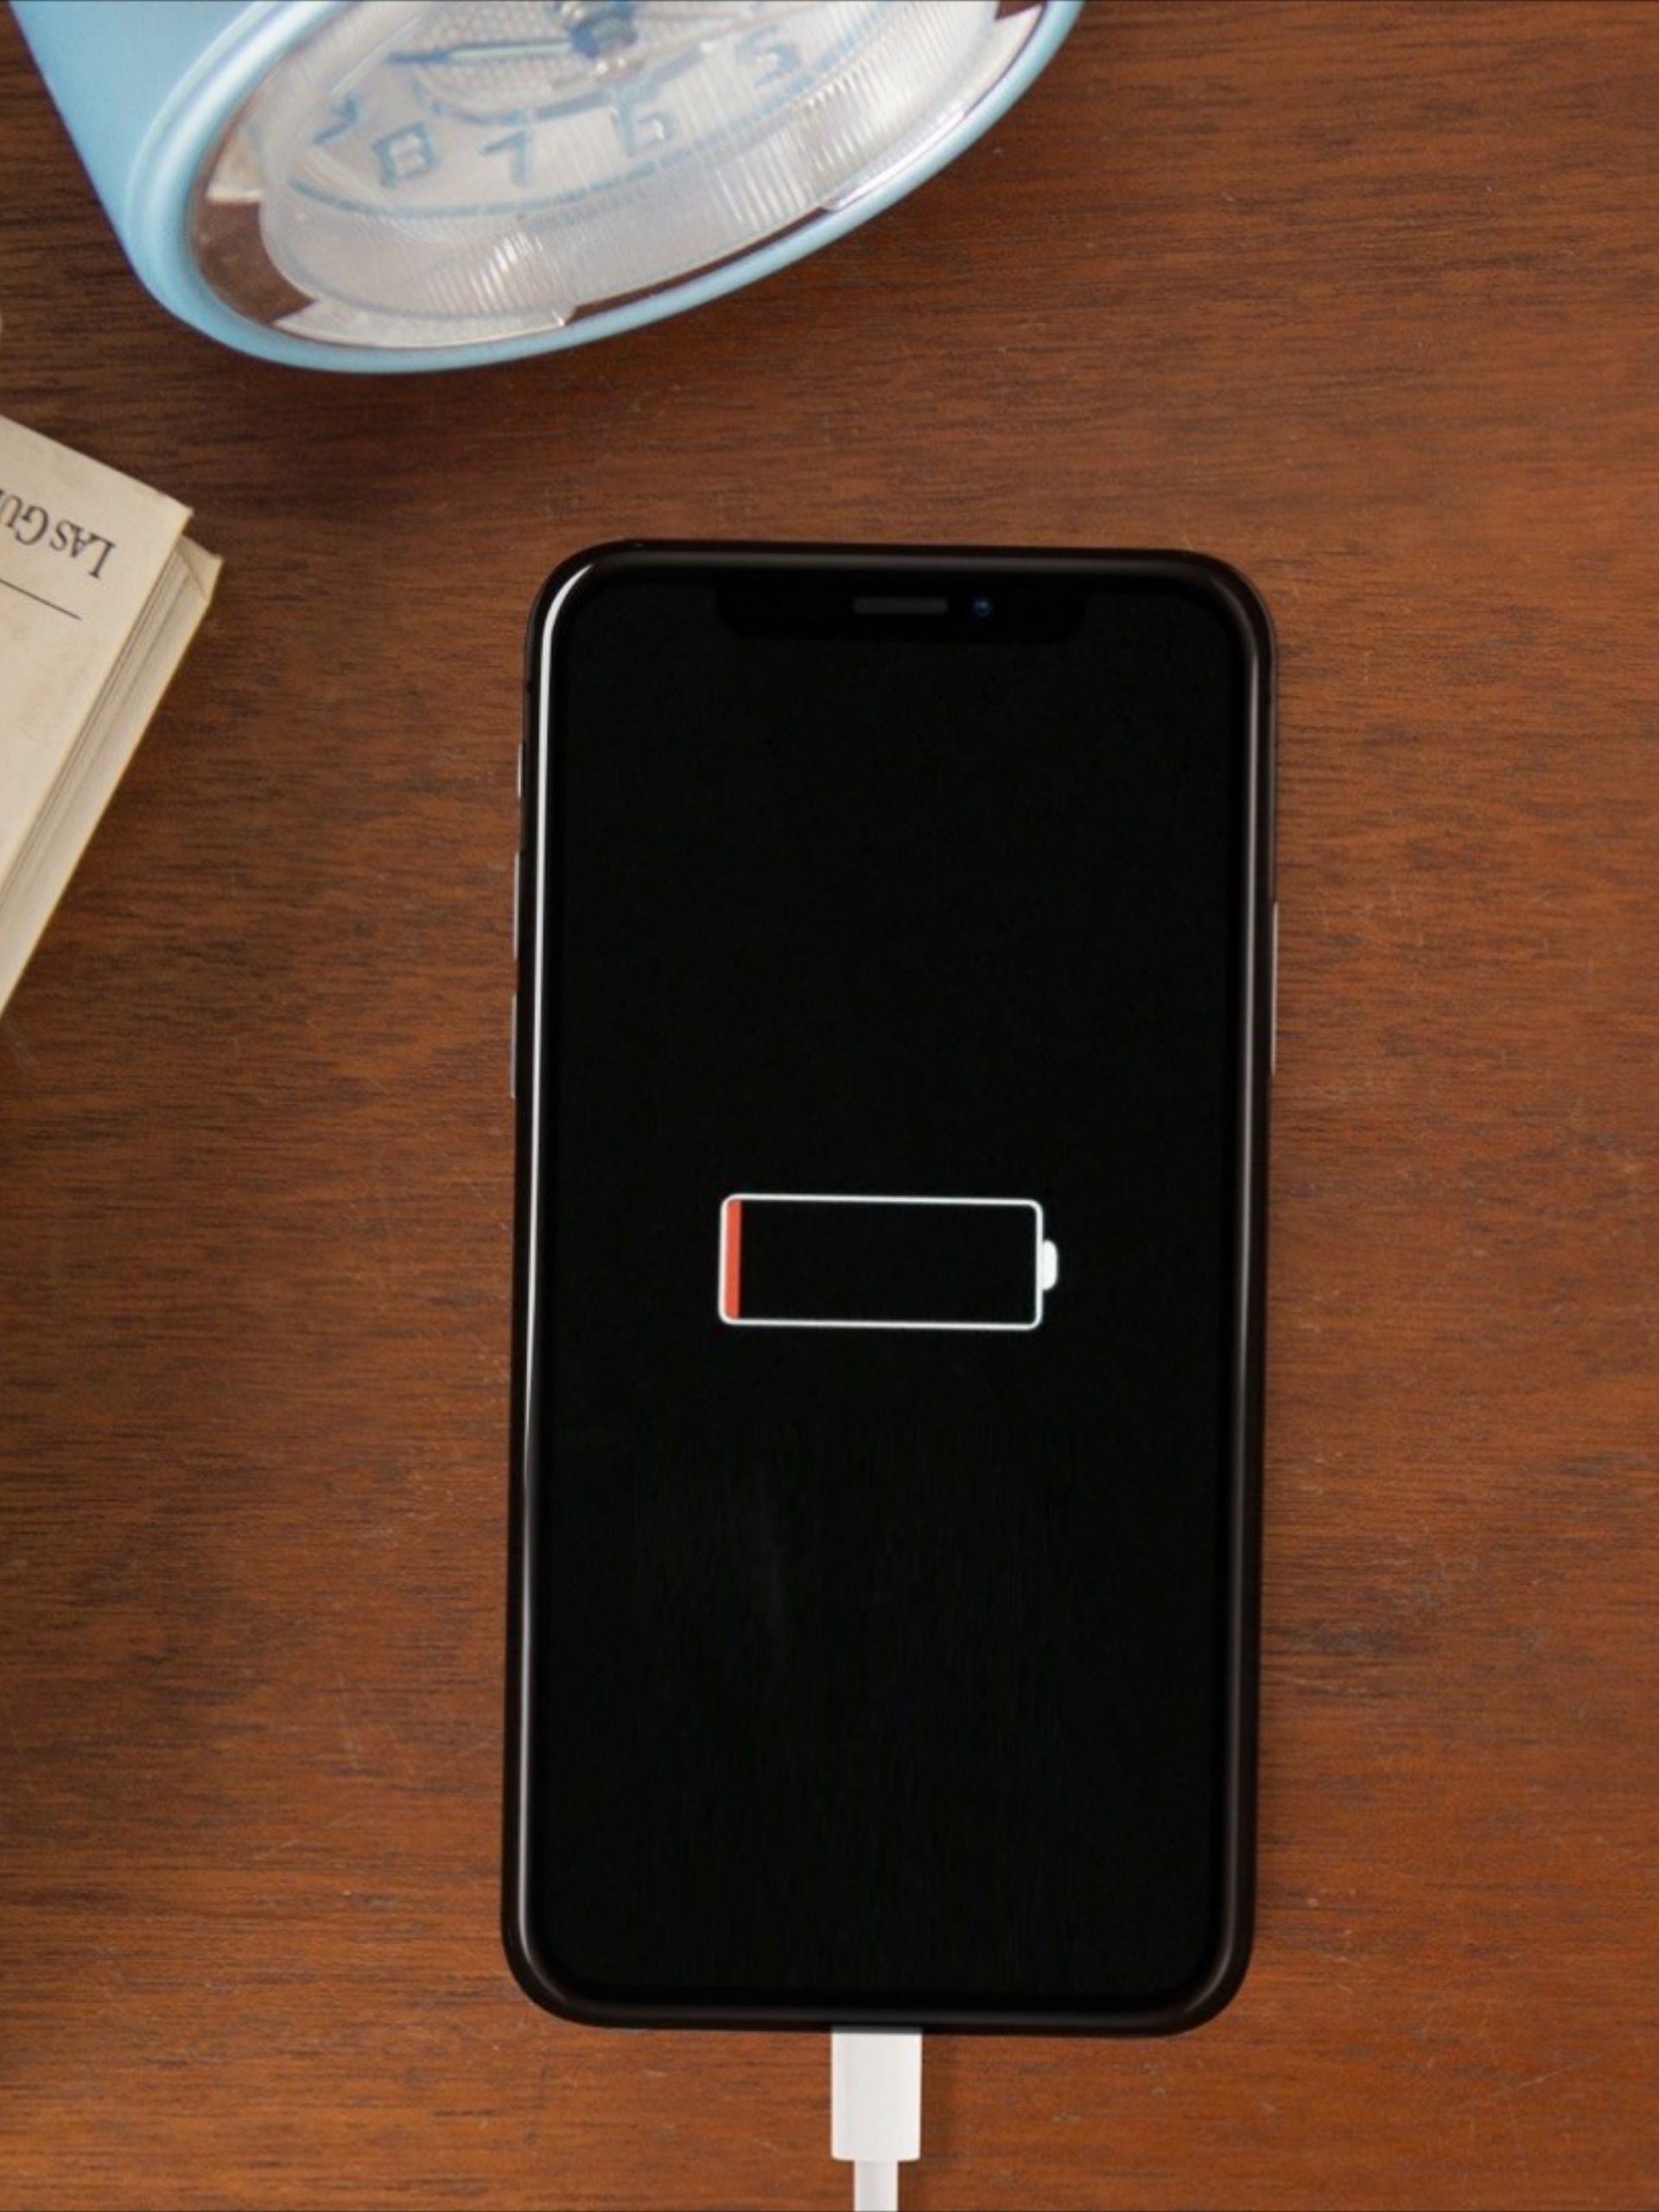 iPhone Charging Screen / How To Tell If An iPhone Is ...